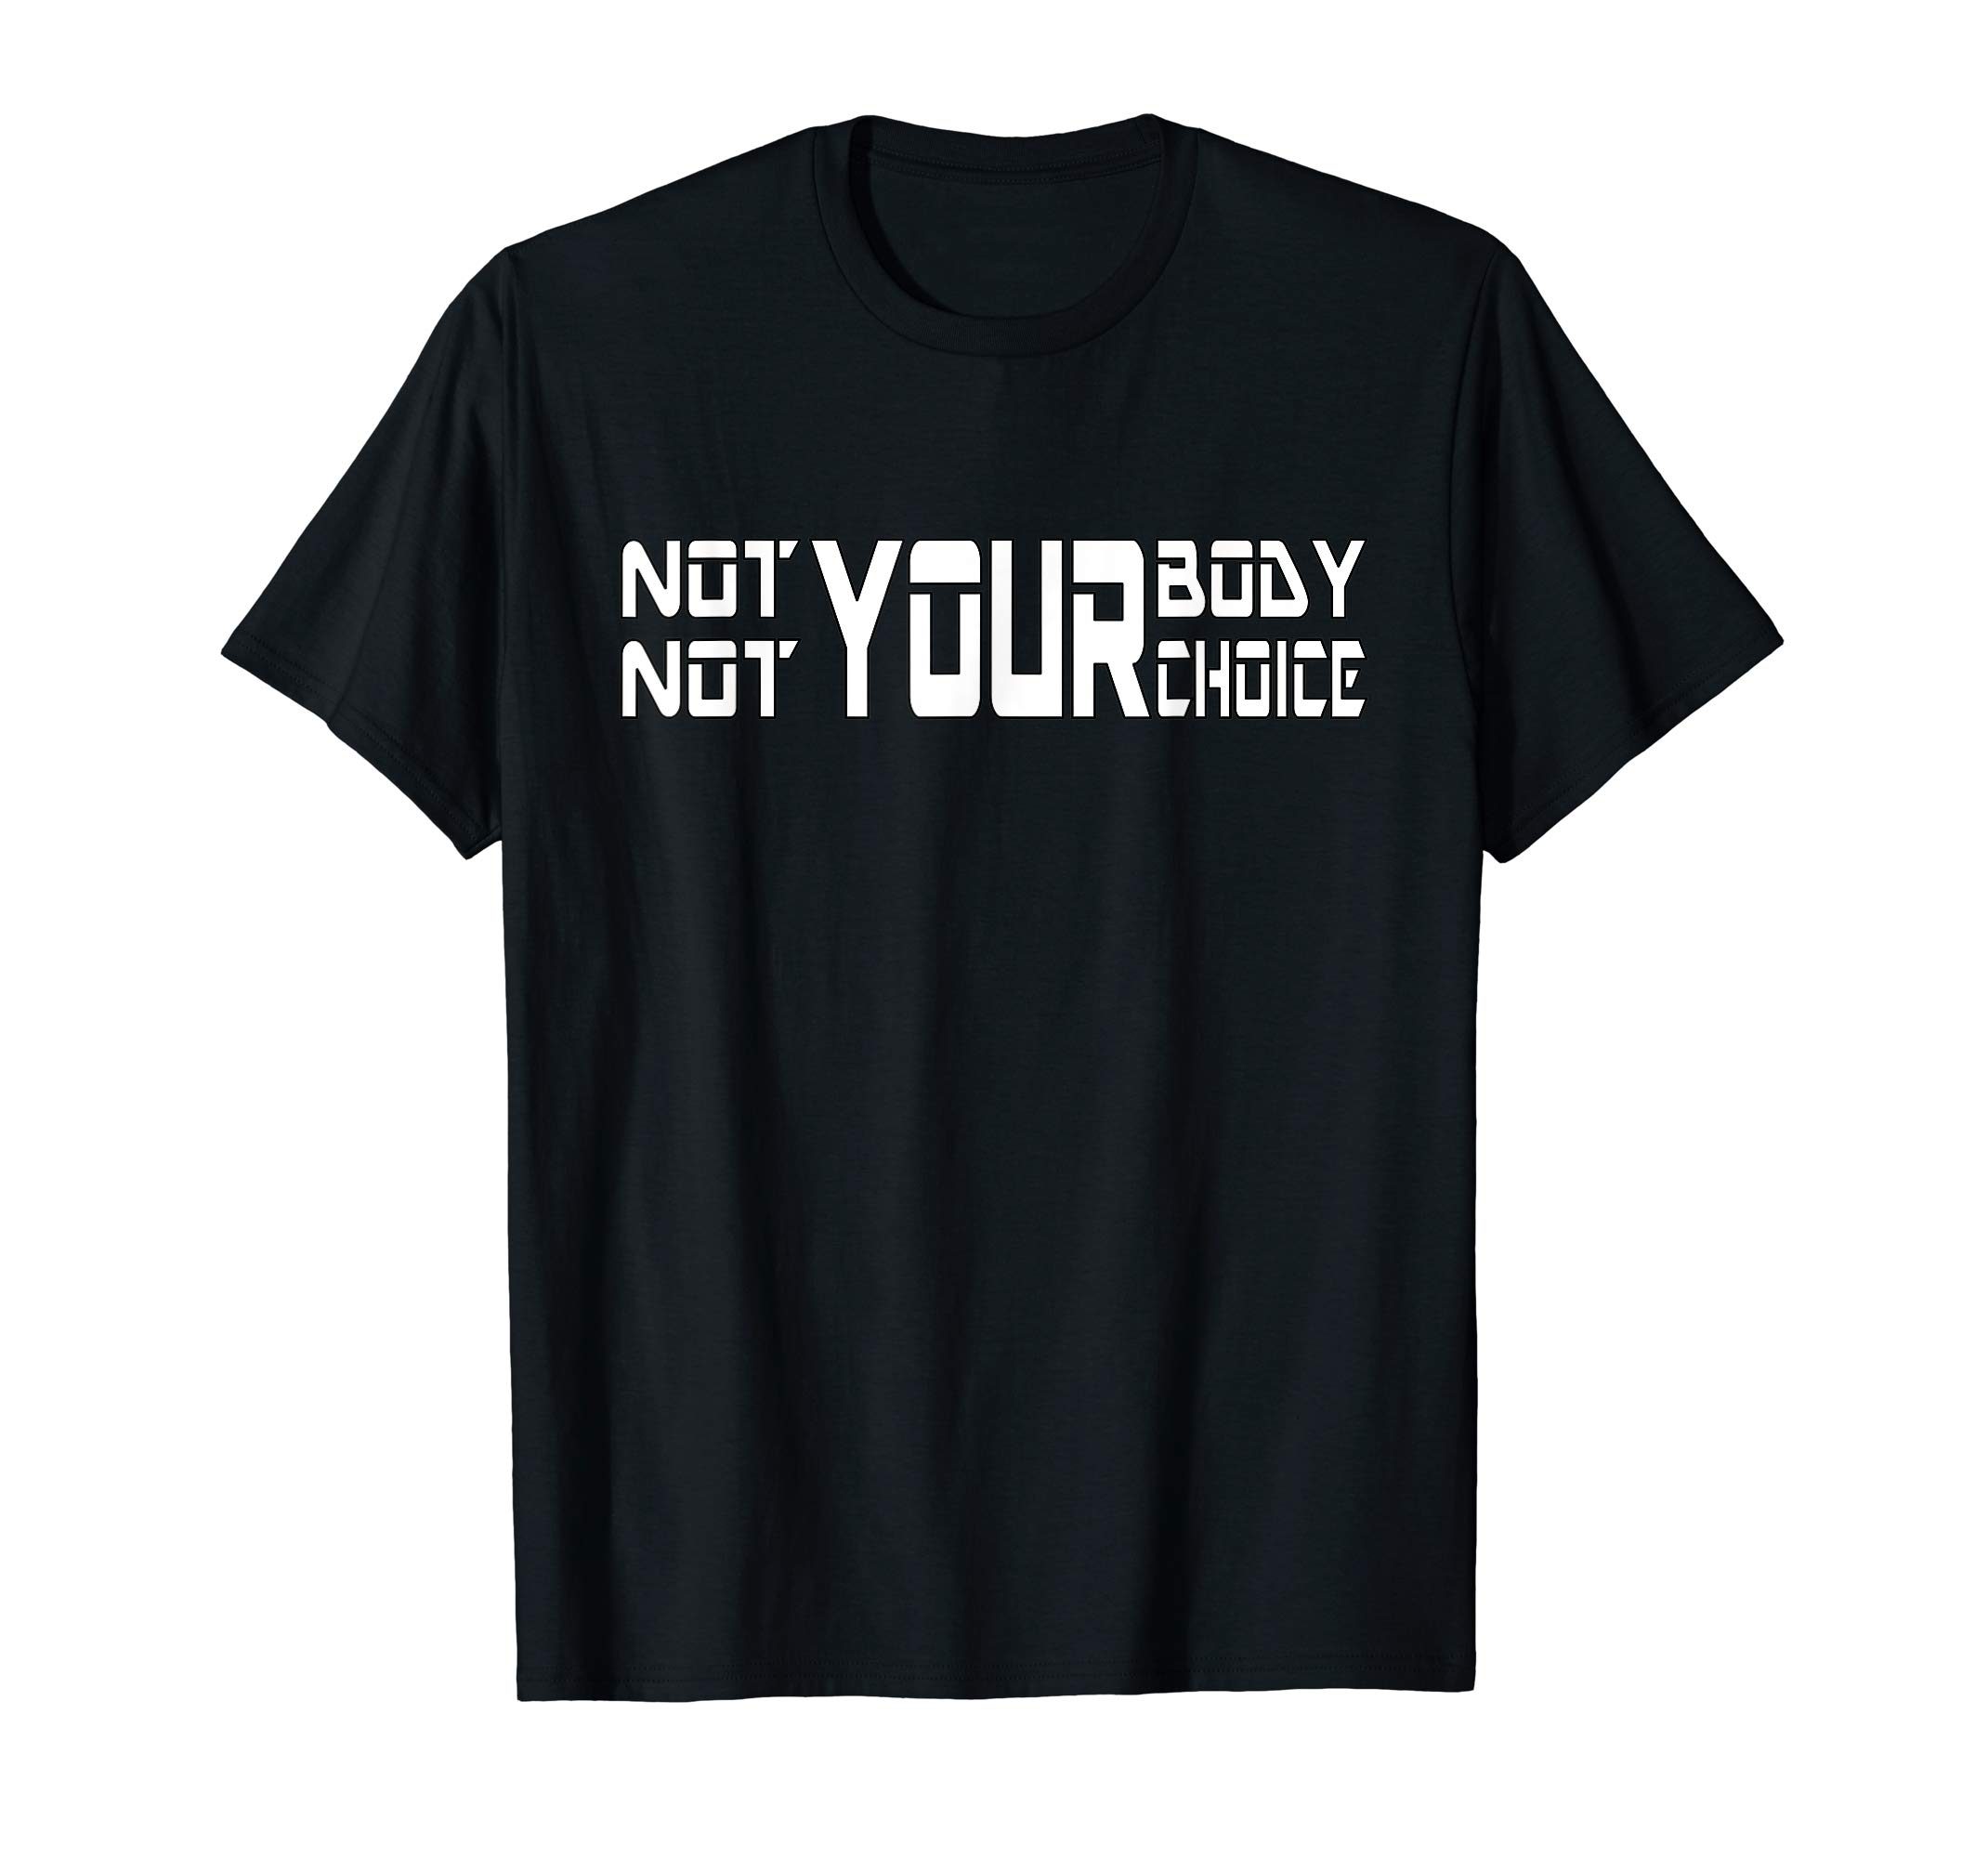 Not Your Body Not Your Choice Women's T-Shirt - OrderQuilt.com